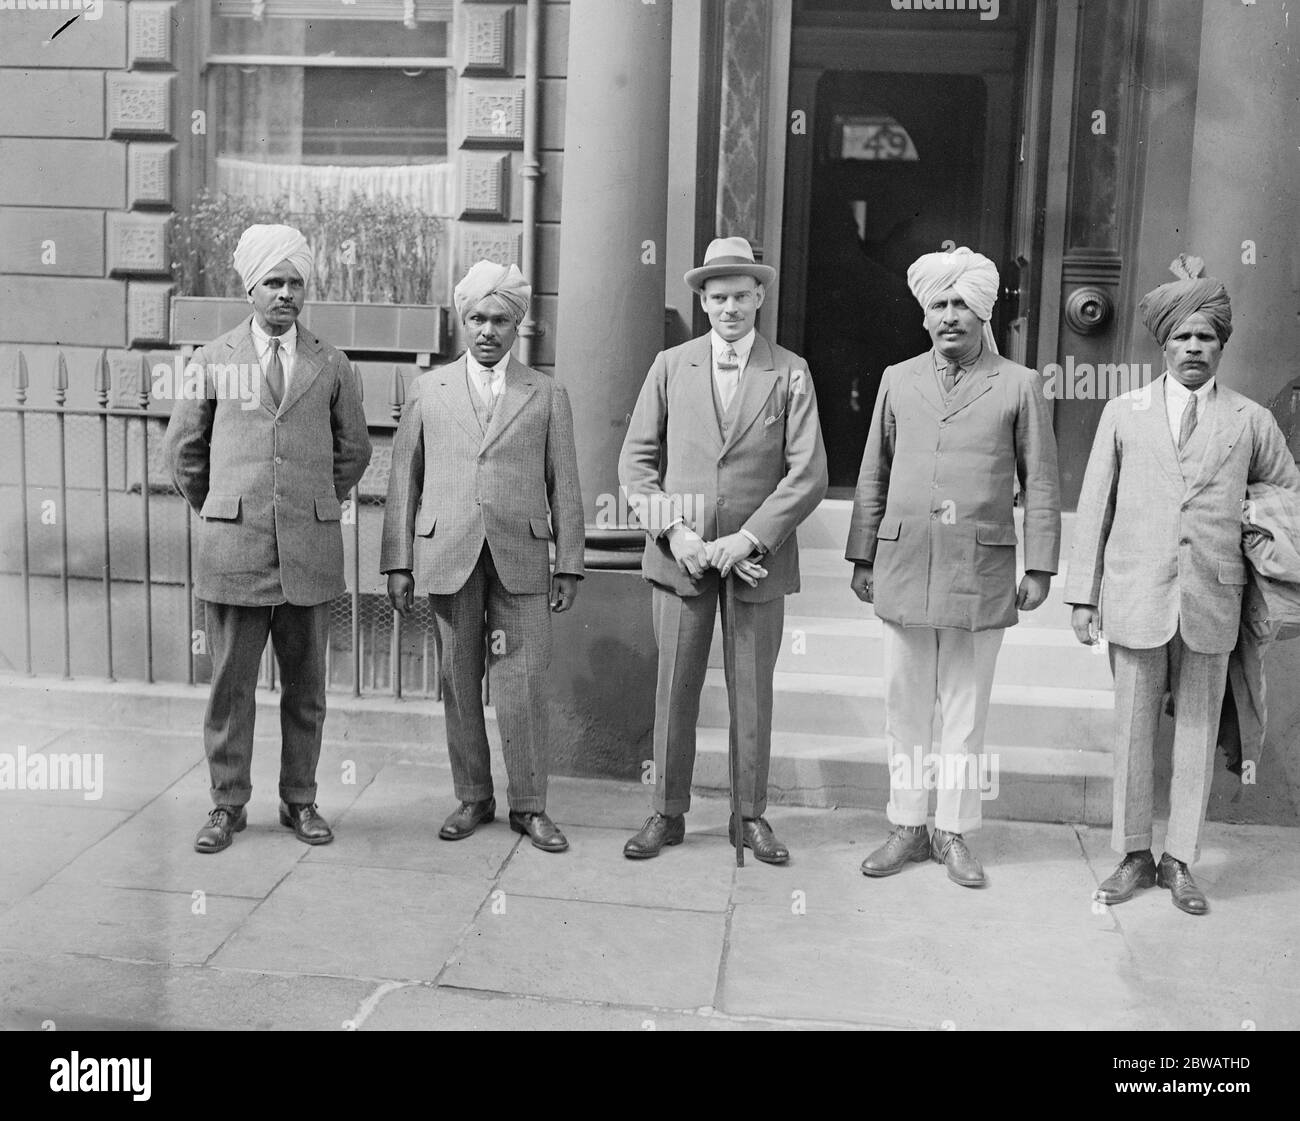 The King' s Indian Orderly officers for 1922 have just arrived in London left to right Hon Lt Joseph Bahadur , Major W G Stover , Subadur Major Vishram Rao Chowan , Hon Lt Krishna Ehale Bahadur The Indian officers have had from 21 to 29 years service and all served in the Great War 14 April 1922 Stock Photo